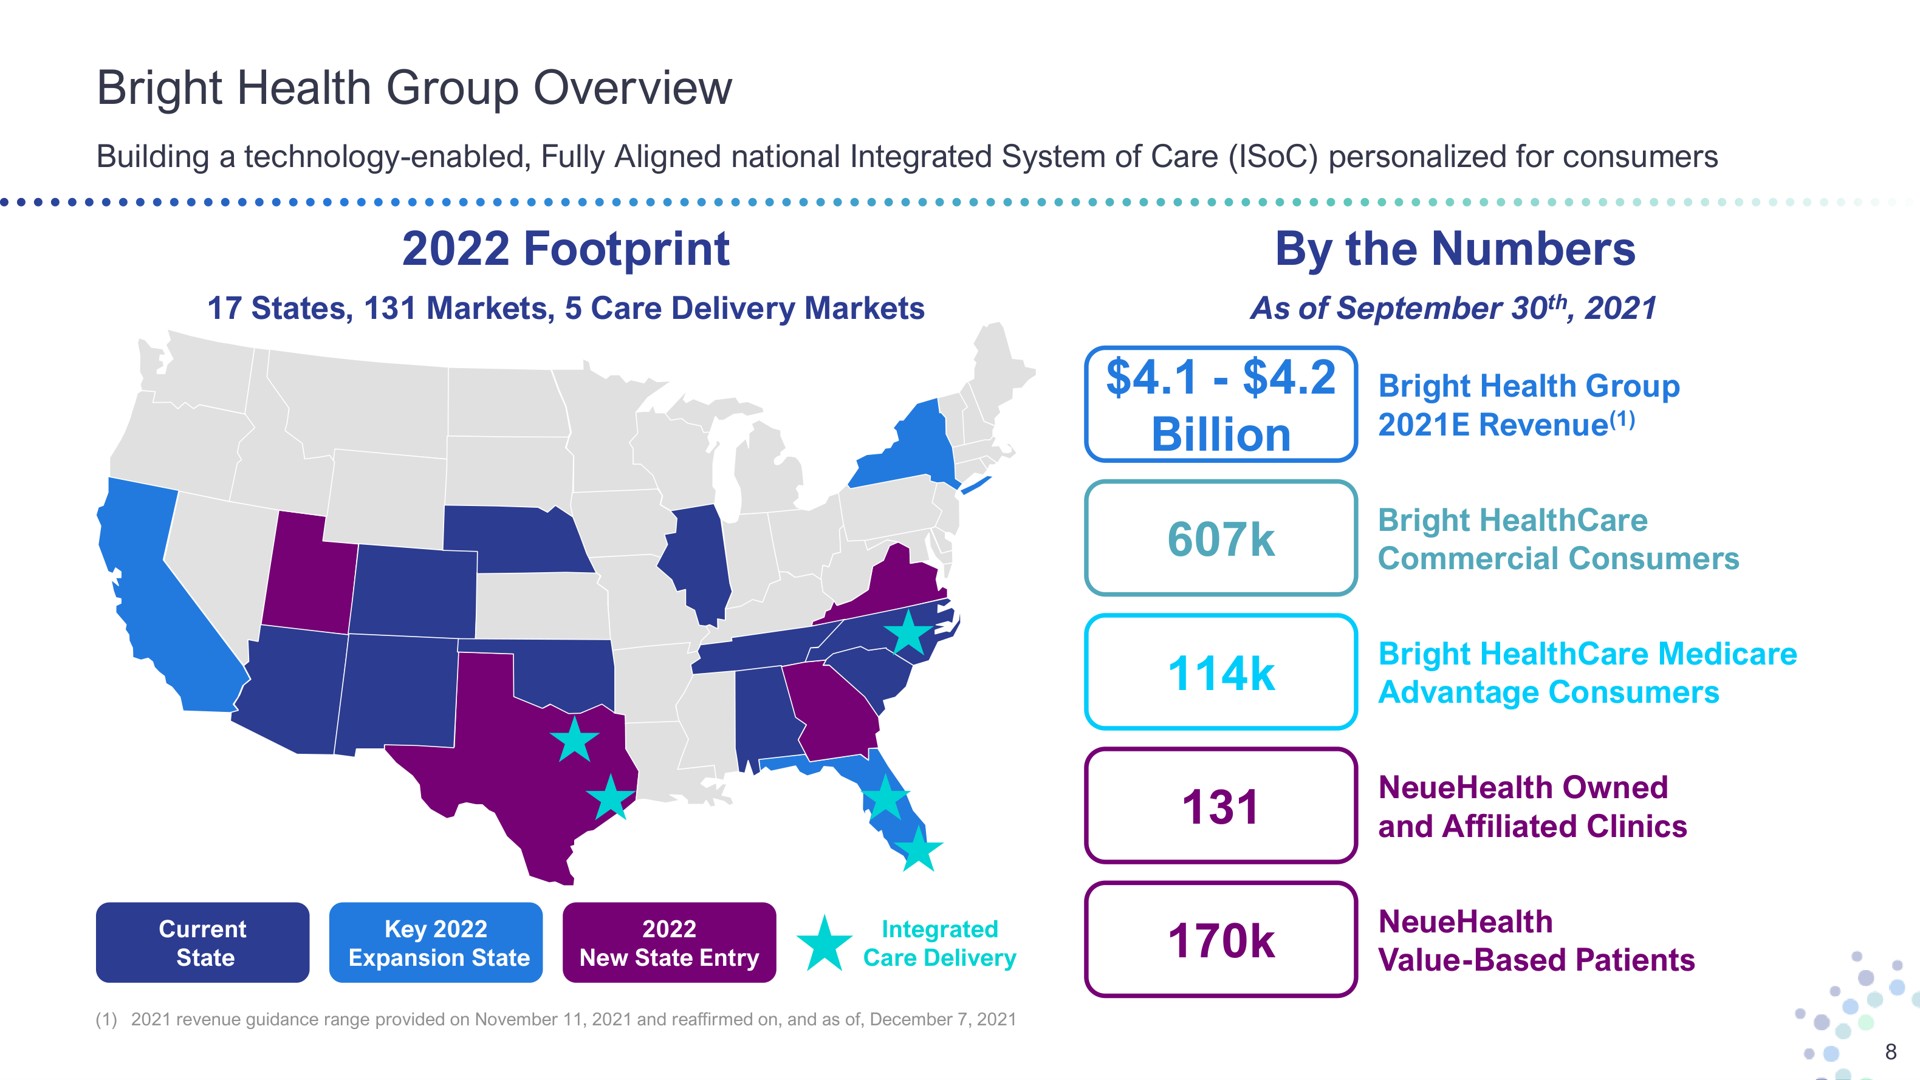 bright health group overview footprint by the numbers billion building a technology enabled fully aligned national integrated system of care personalized for consumers states markets care delivery markets as of a revenue a commercial consumers advantage consumers owned and affiliated clinics ore key integrated | Bright Health Group